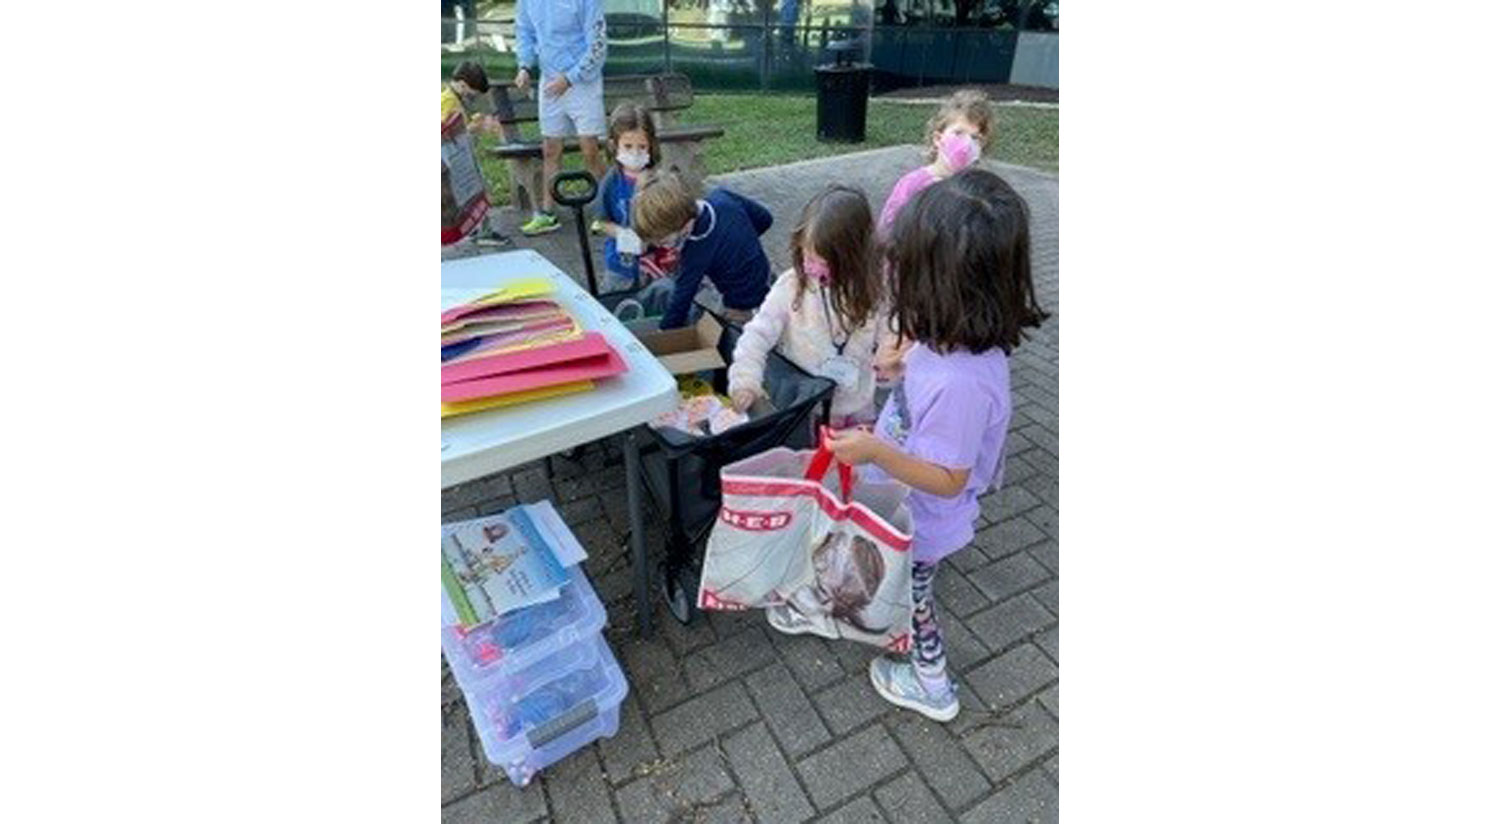 Little Helpers, children ages 3-5 and their families, sort food in the Shalom Austin Jewish Family Service food pantry, decorate reusable bags to take to the grocery store and make rice socks for cats in local Austin animal shelters. Photo credit: Rabbi Amy B. Cohen